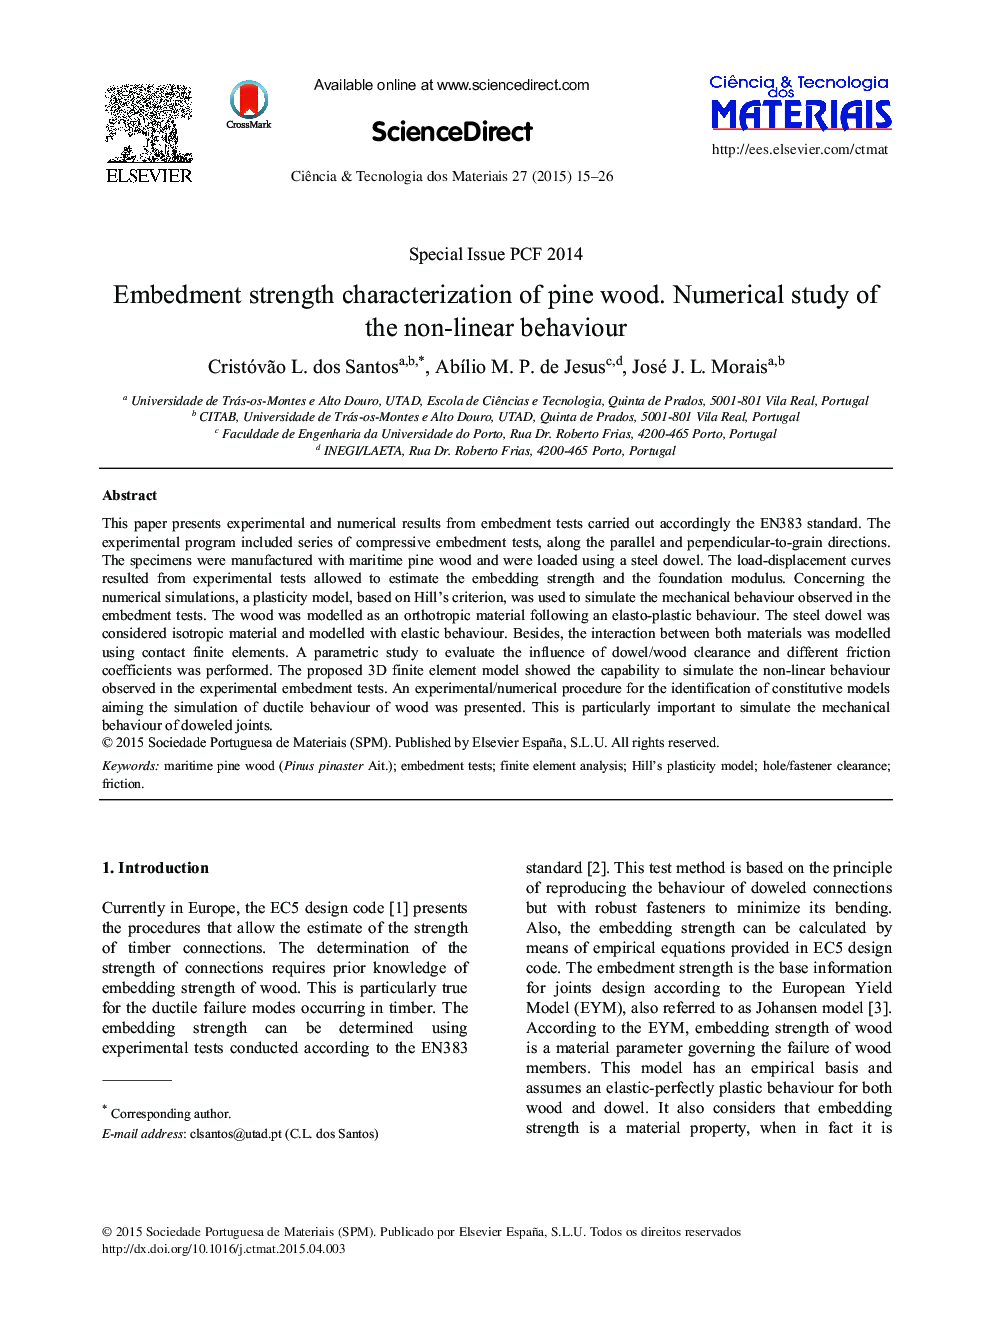 Embedment strength characterization of pine wood. Numerical study of the non-linear behaviour